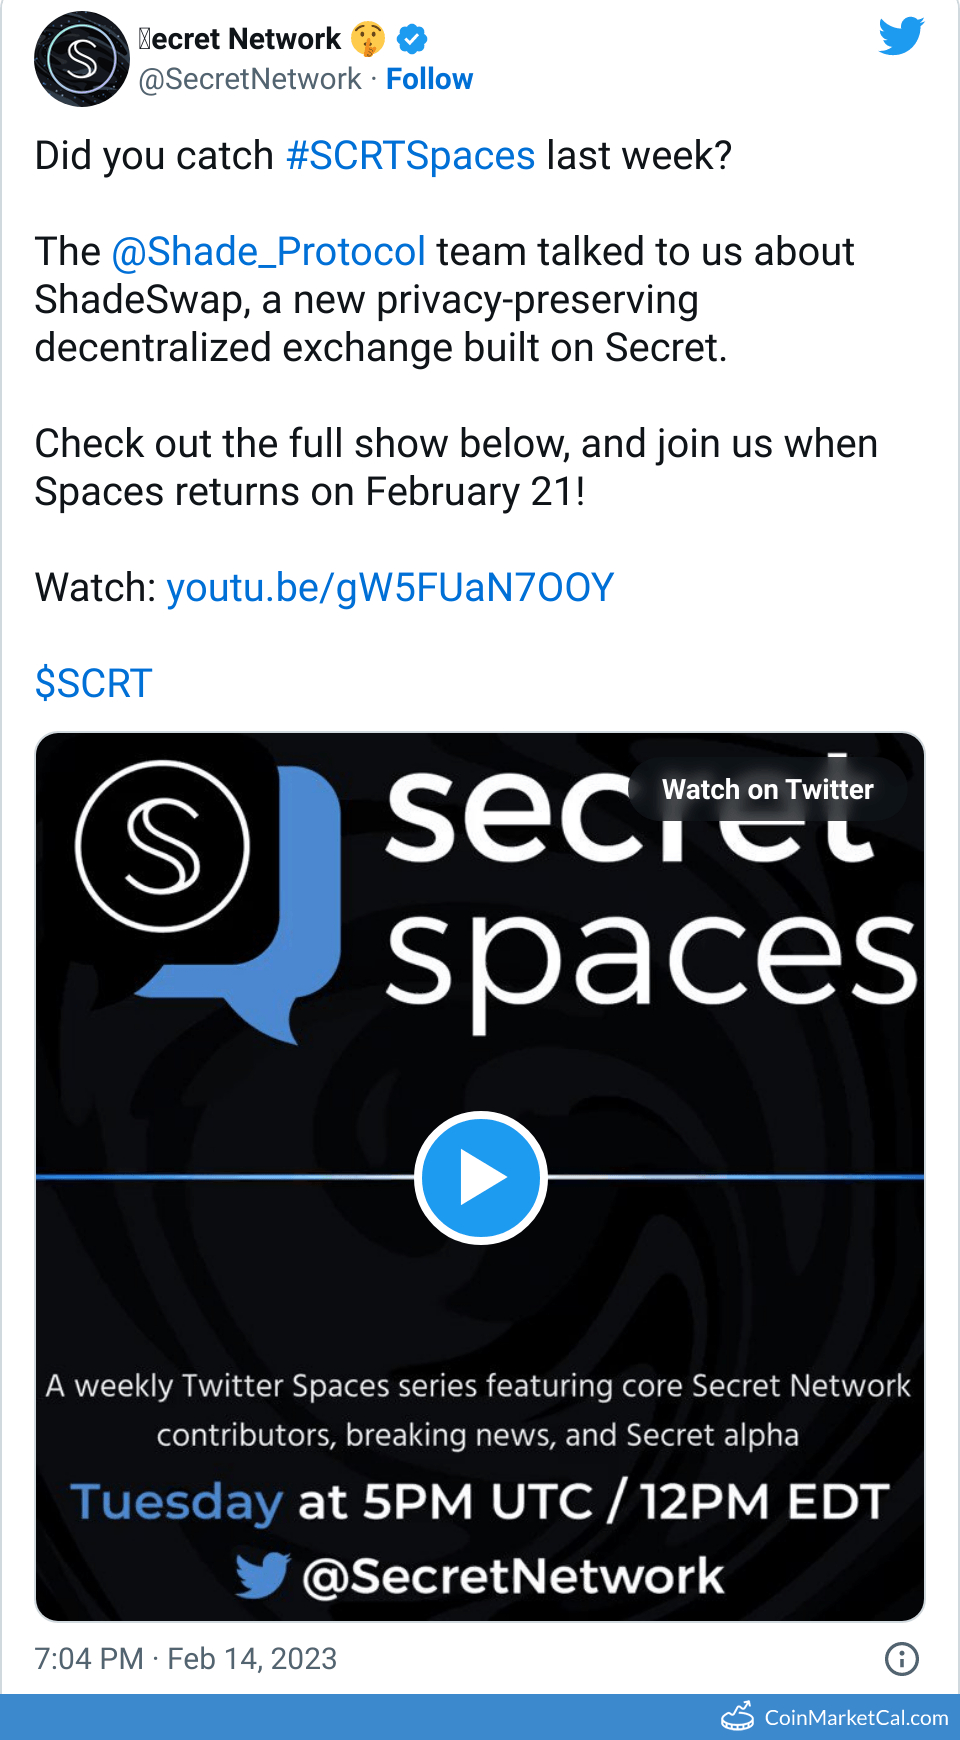 Twitter Spaces image